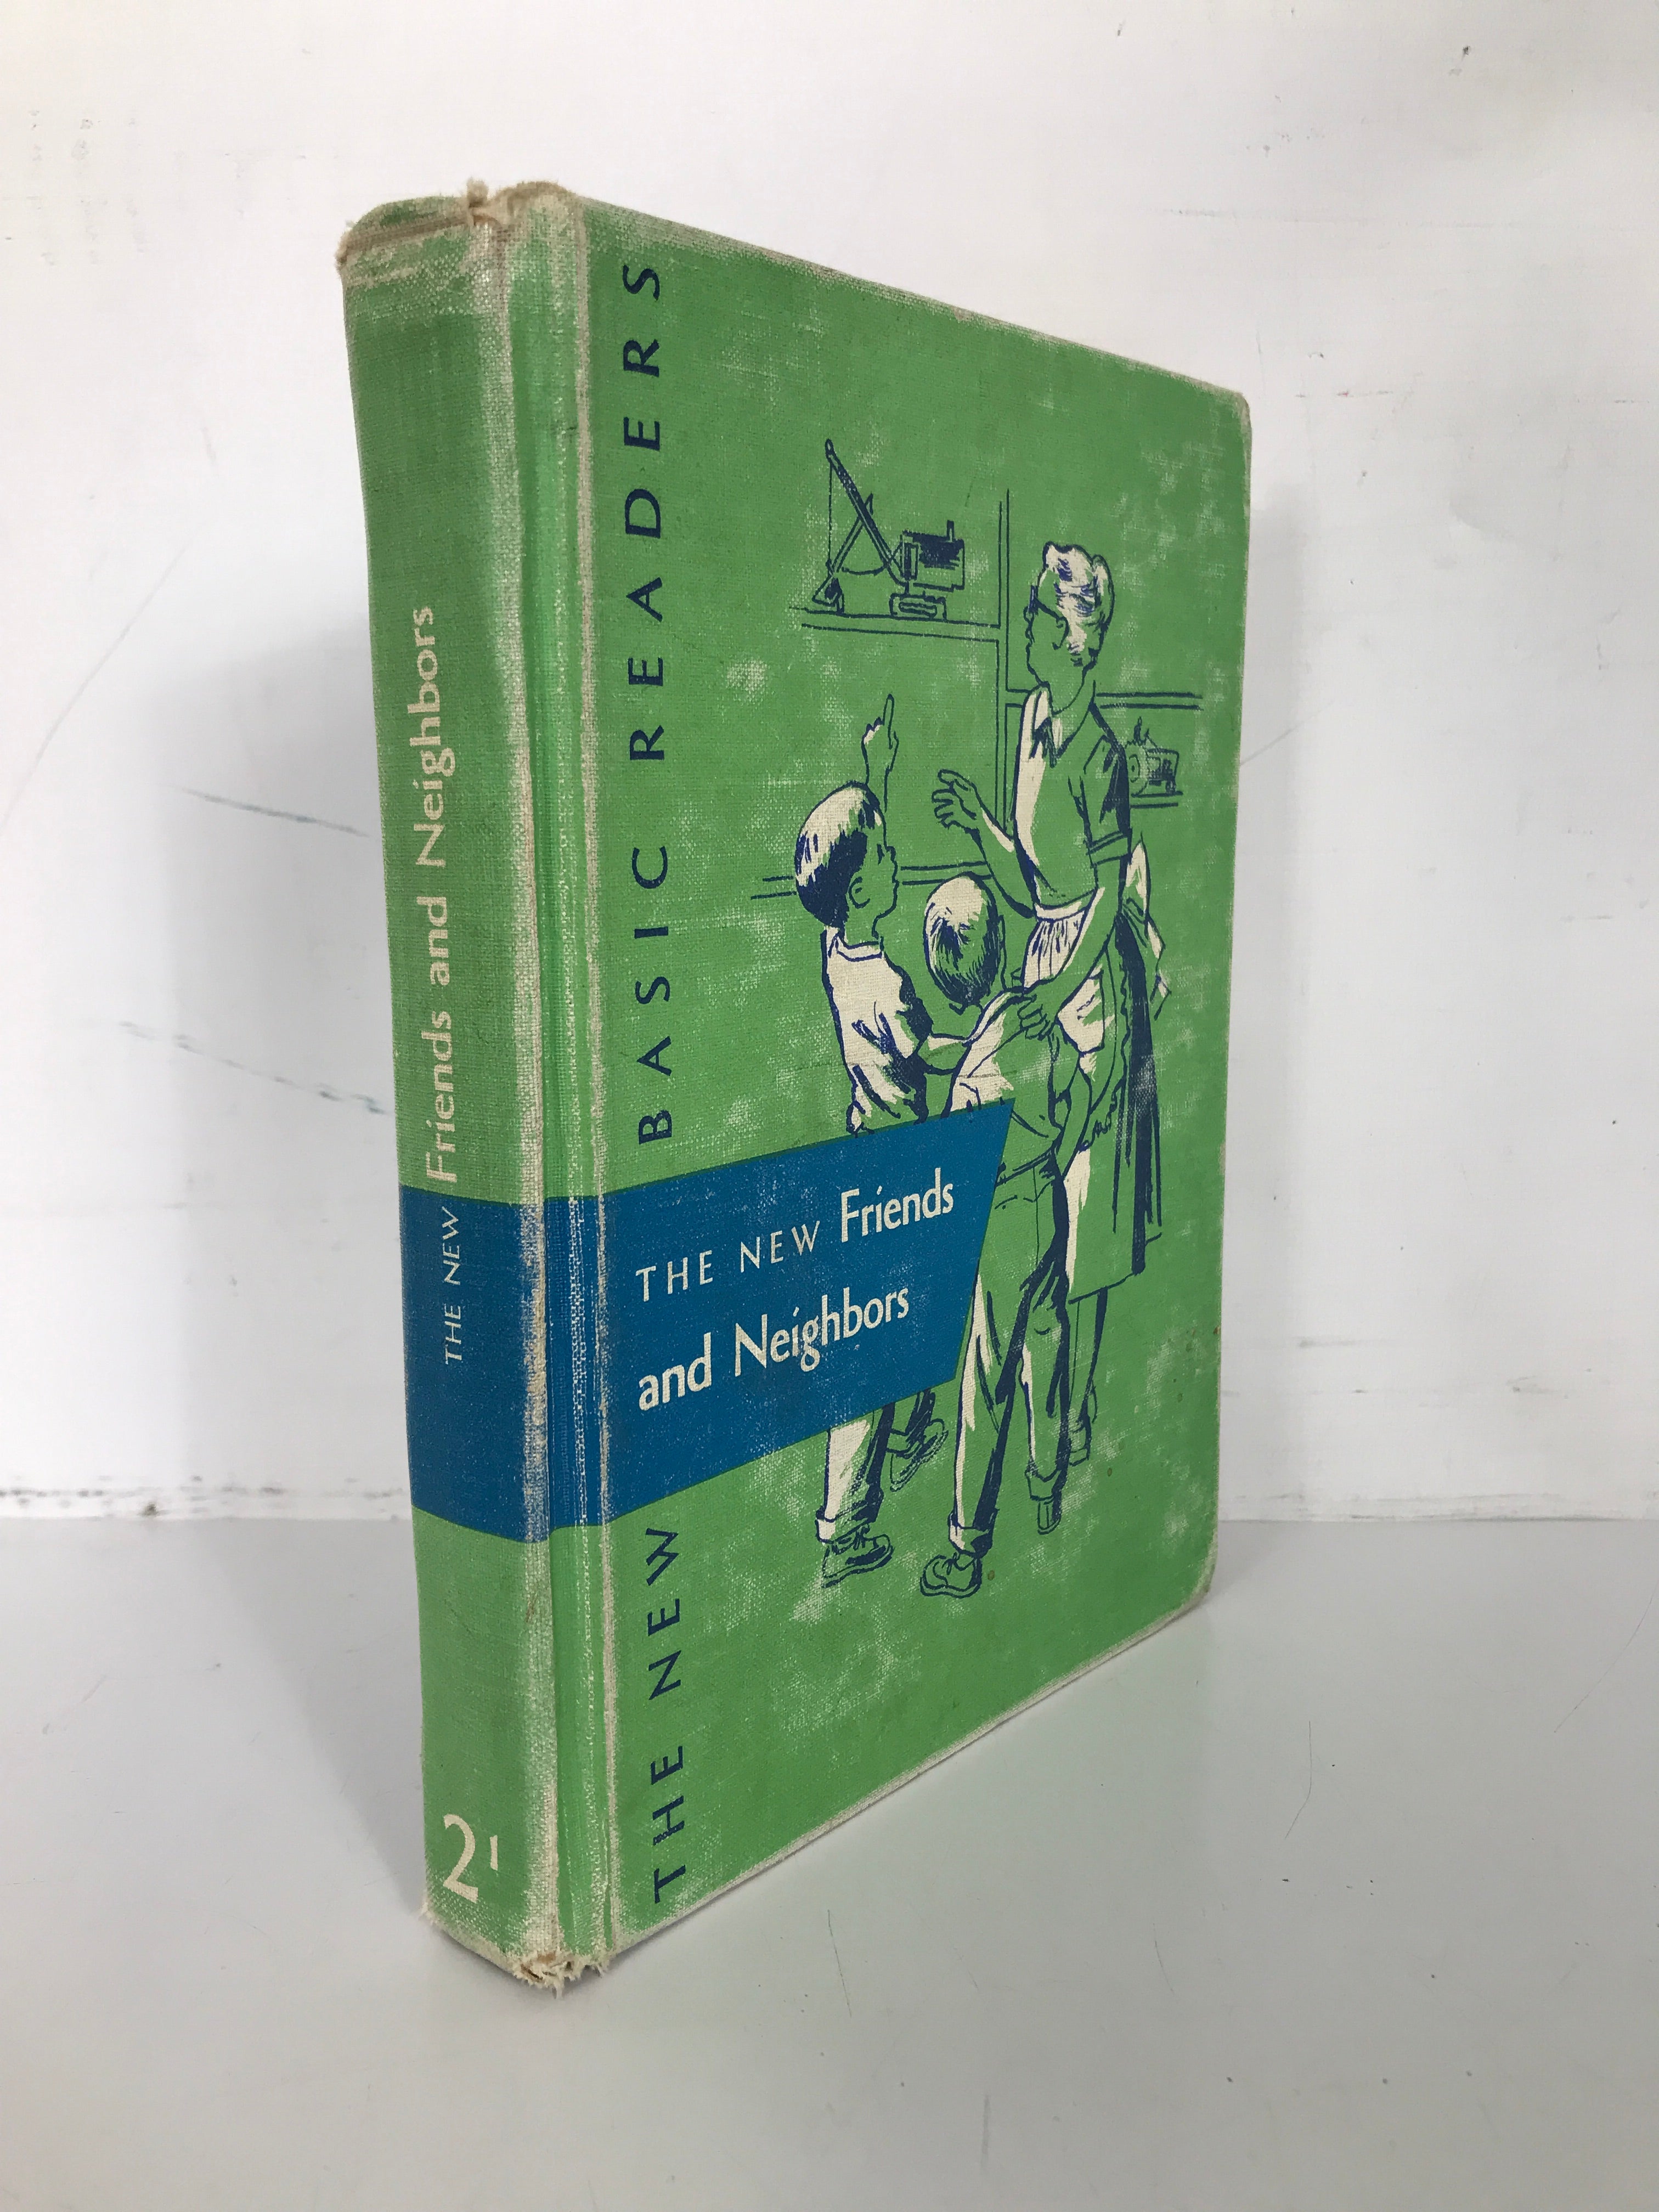 The New Friends and Neighbors 1952 Scott Foresman and Company HC